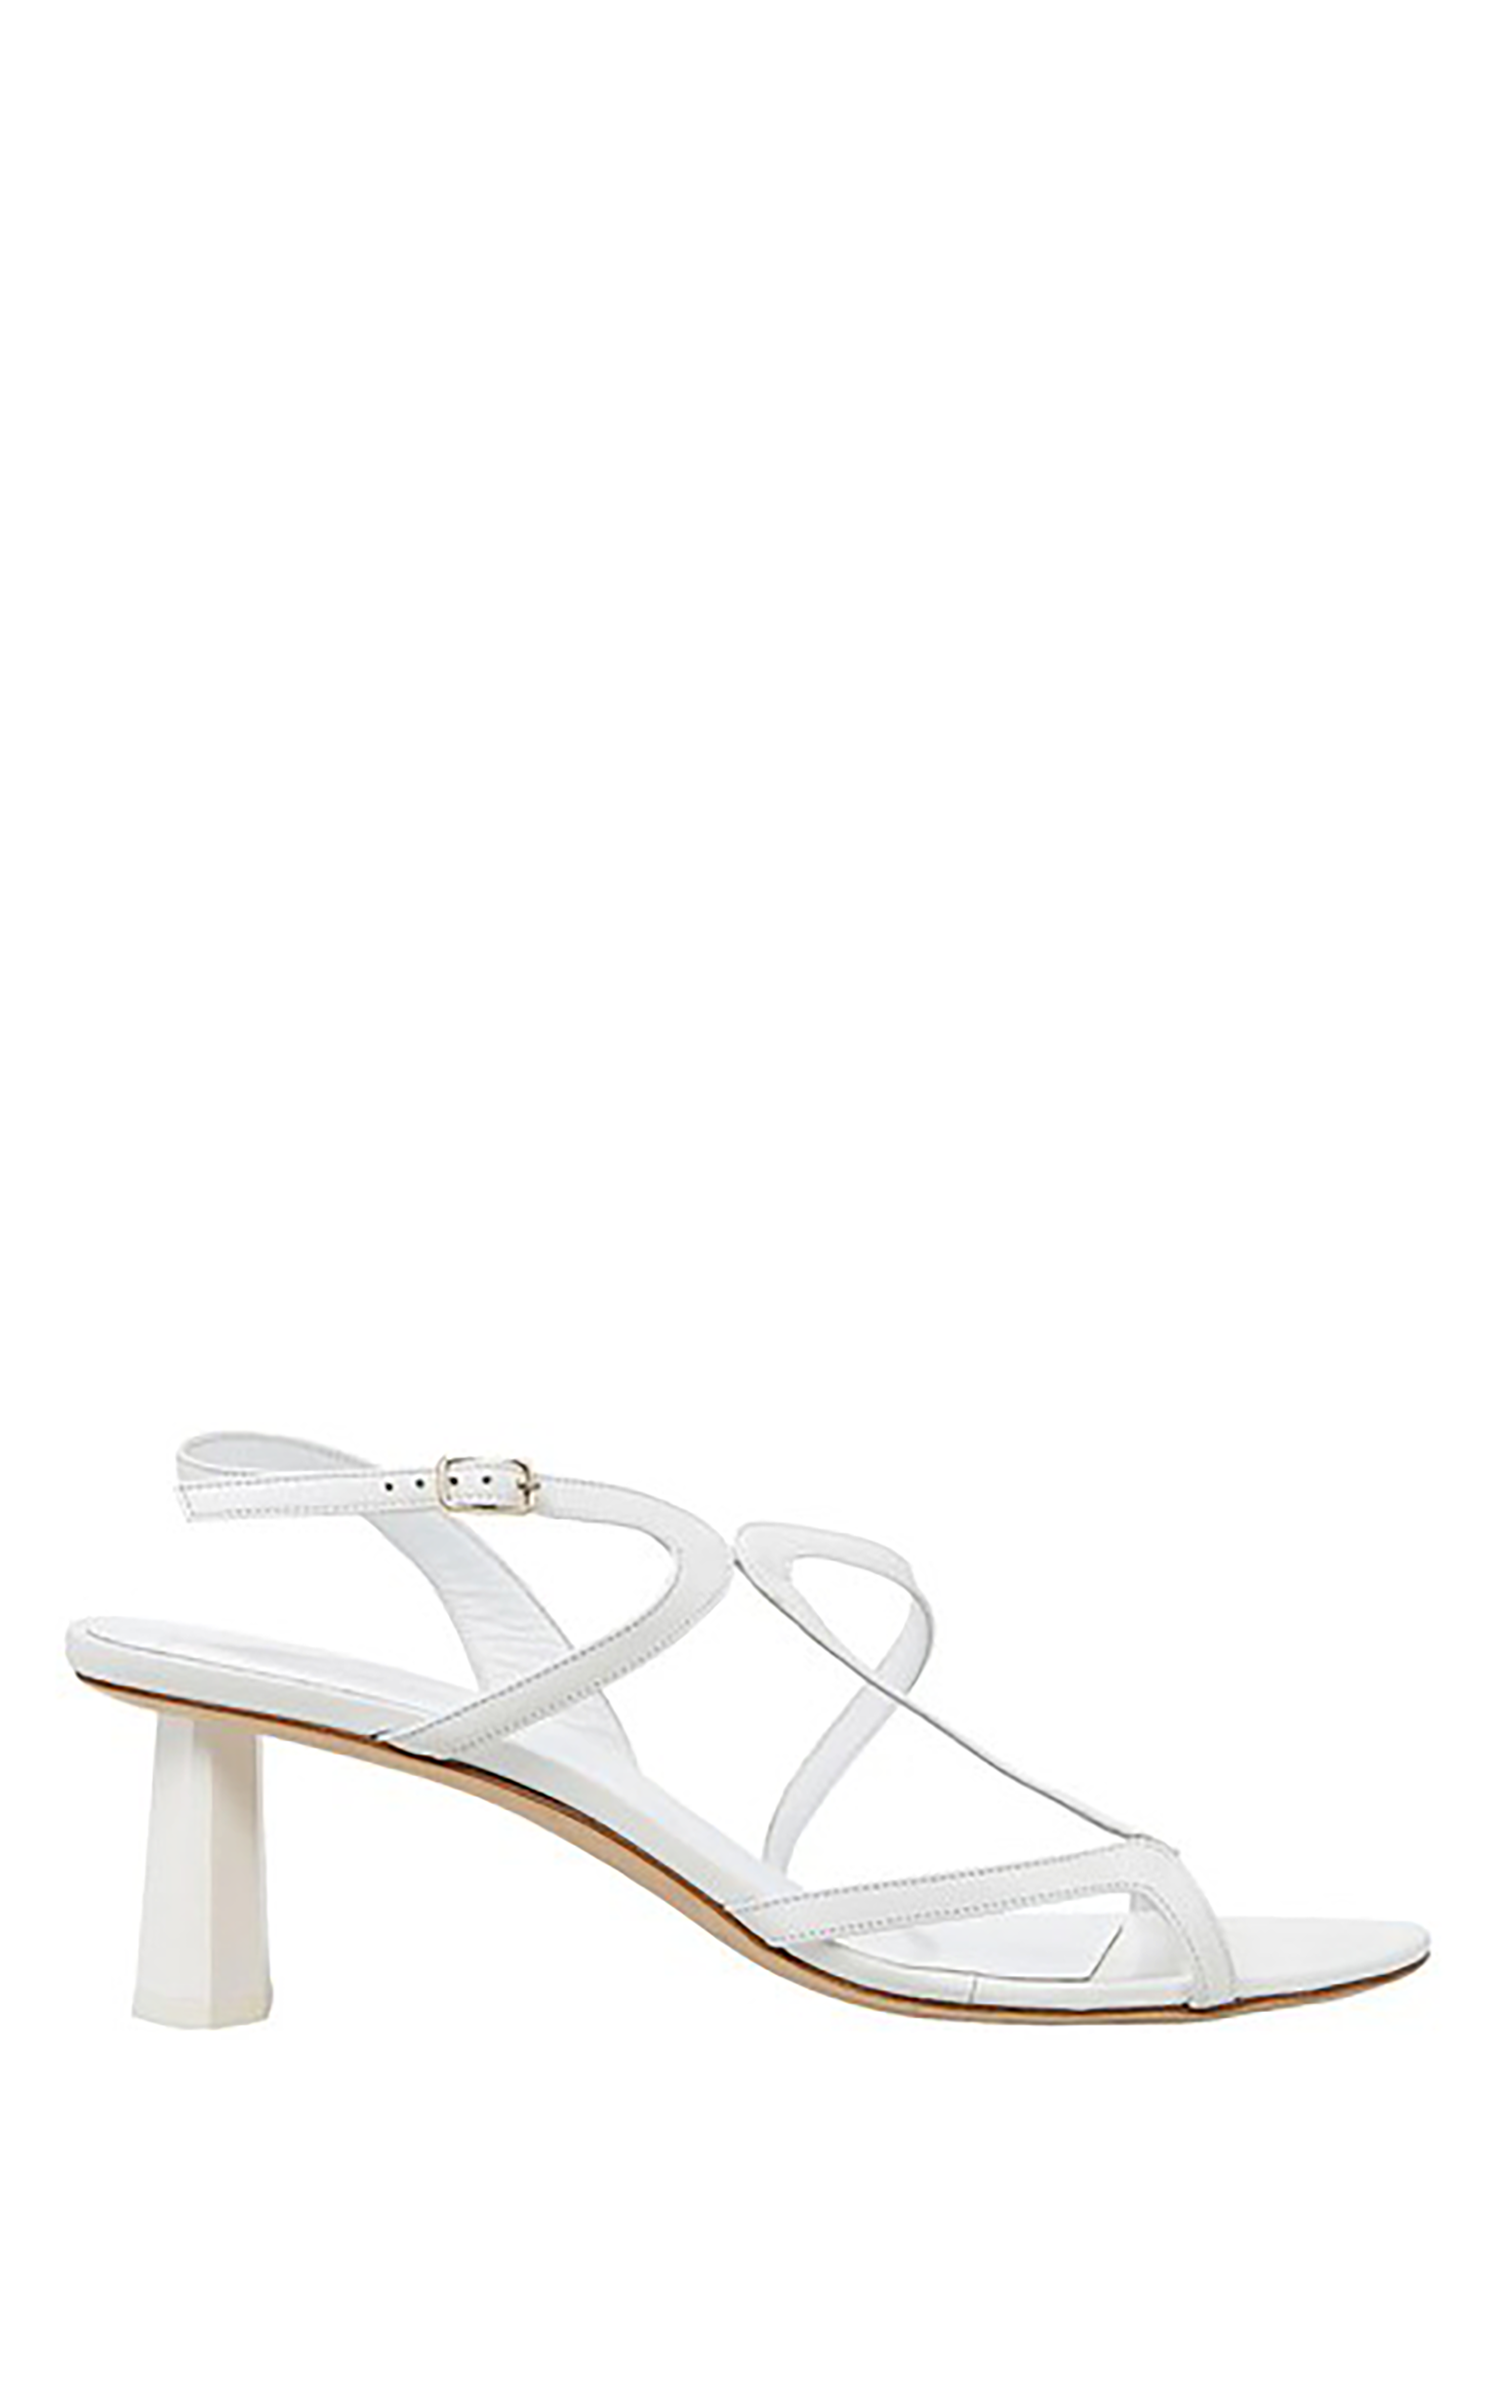 by-far-white-brigette-optic-leather-mid-heeled-65-sandals-size-eu-37-approx-us-7-regular-m-b-2-1-650-650.png